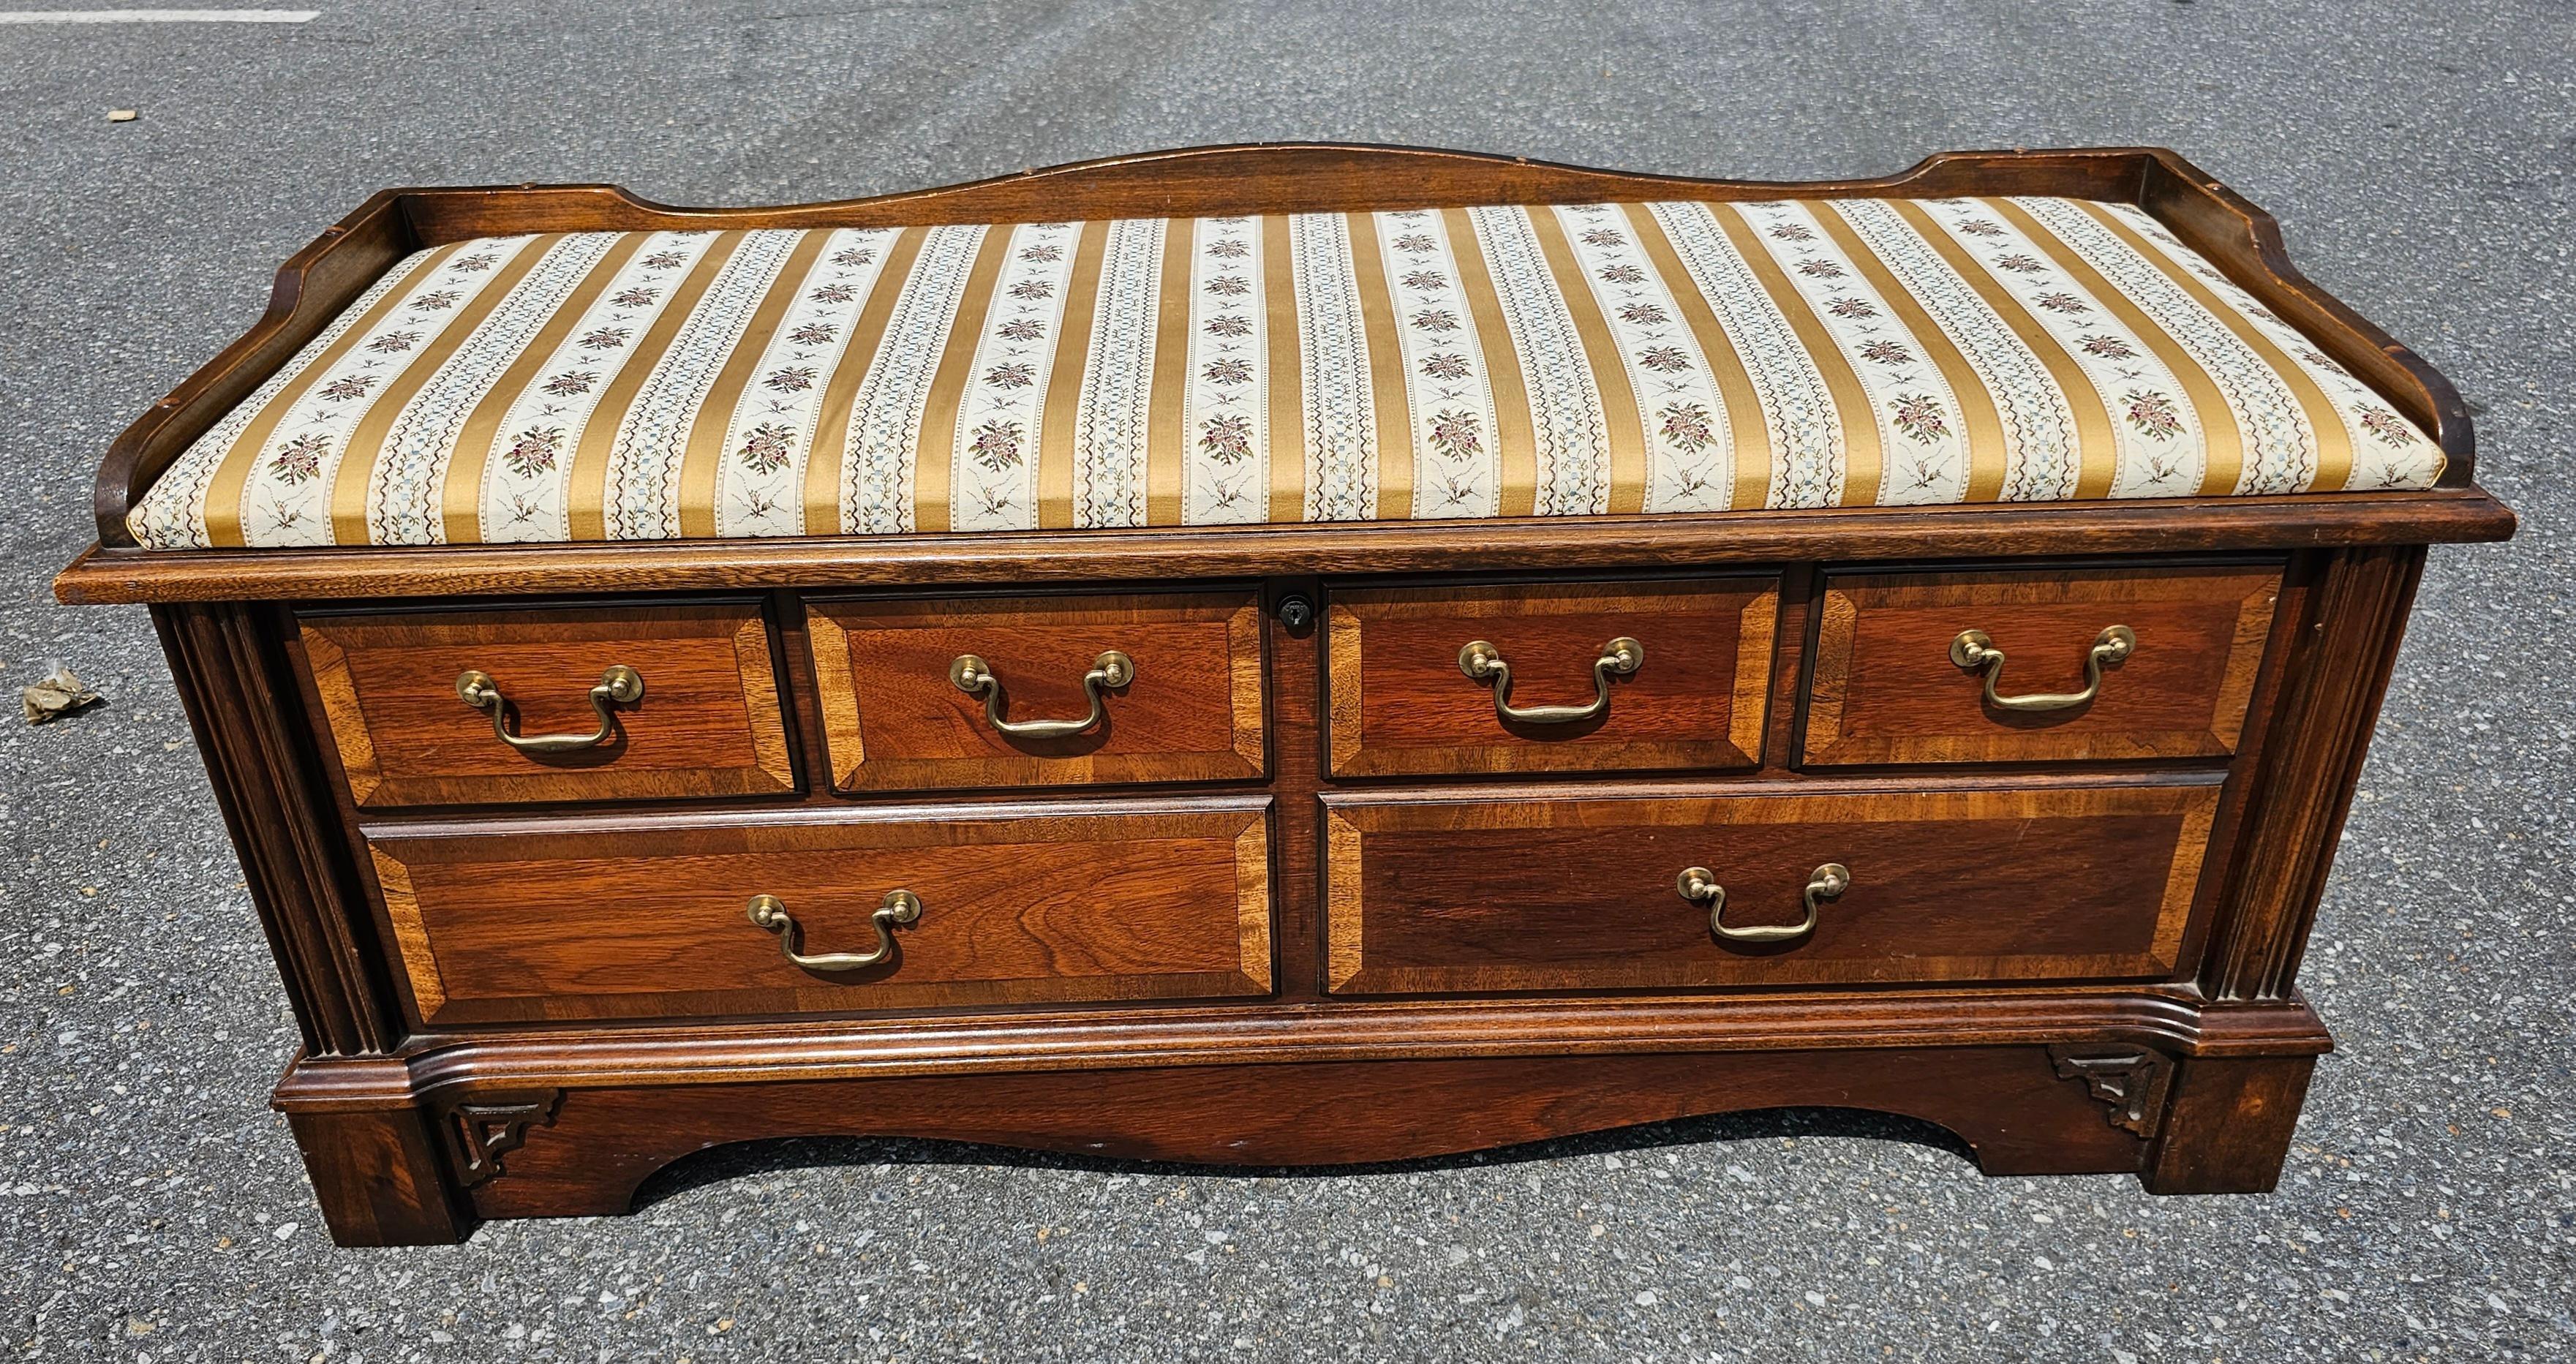 Lane Chippendale Cedar Lined Banded Mahogany Blanket Chest and Upholstered Bench In Good Condition For Sale In Germantown, MD